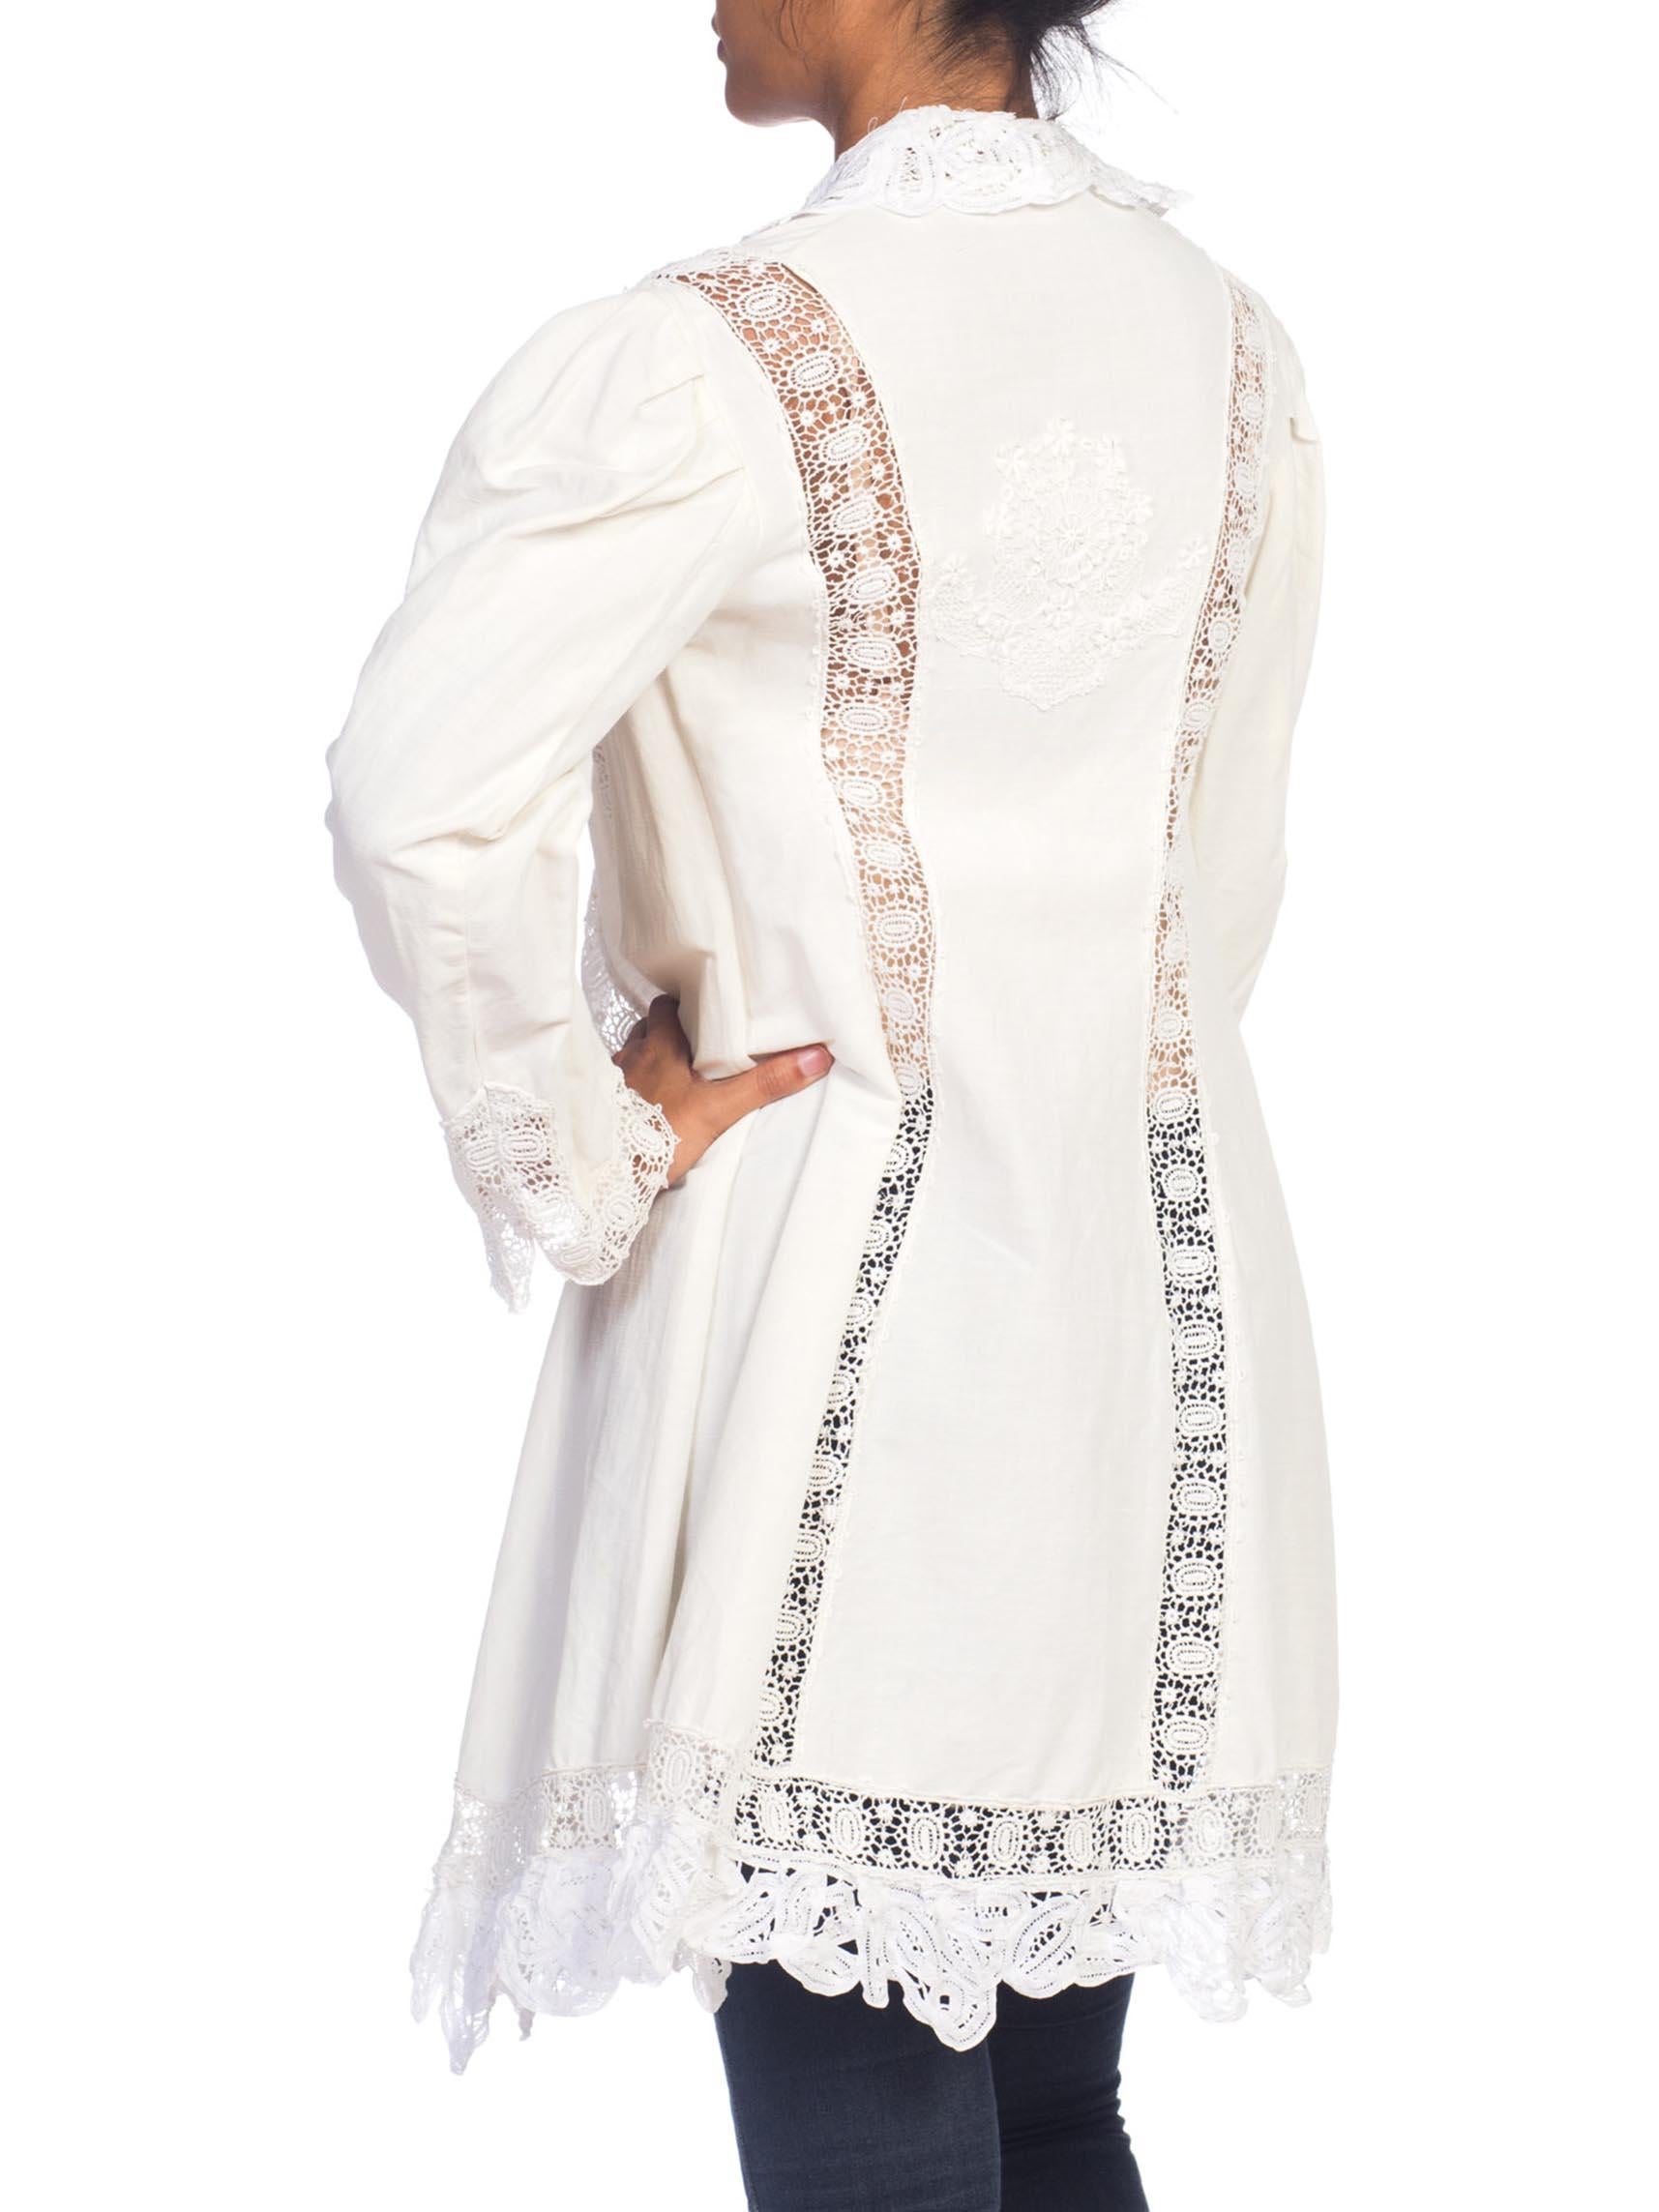 Victorian White Organic Cotton Jacket With Handmade Lace Trim For Sale 2